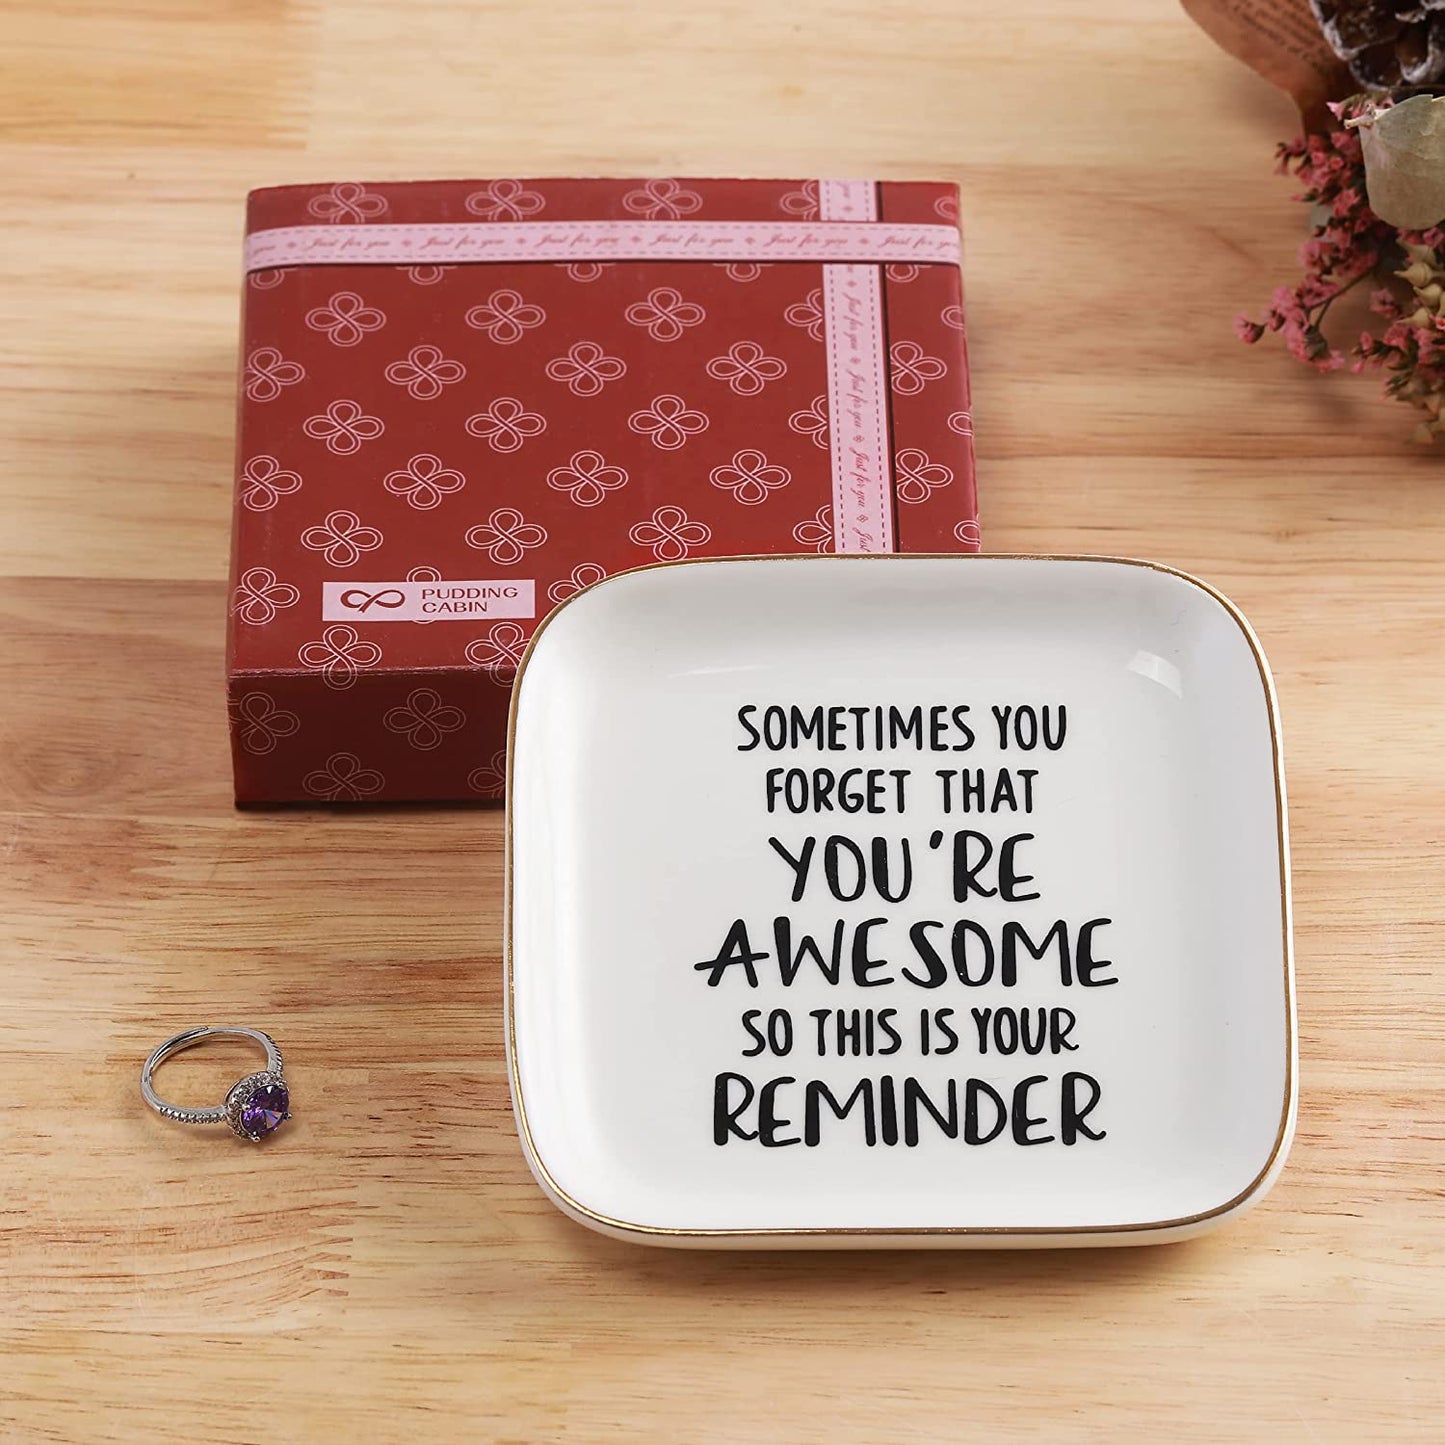 A printed quote on a white ring dish. The quote says, "Sometimes you forget that you're awesome, so this is your reminder".